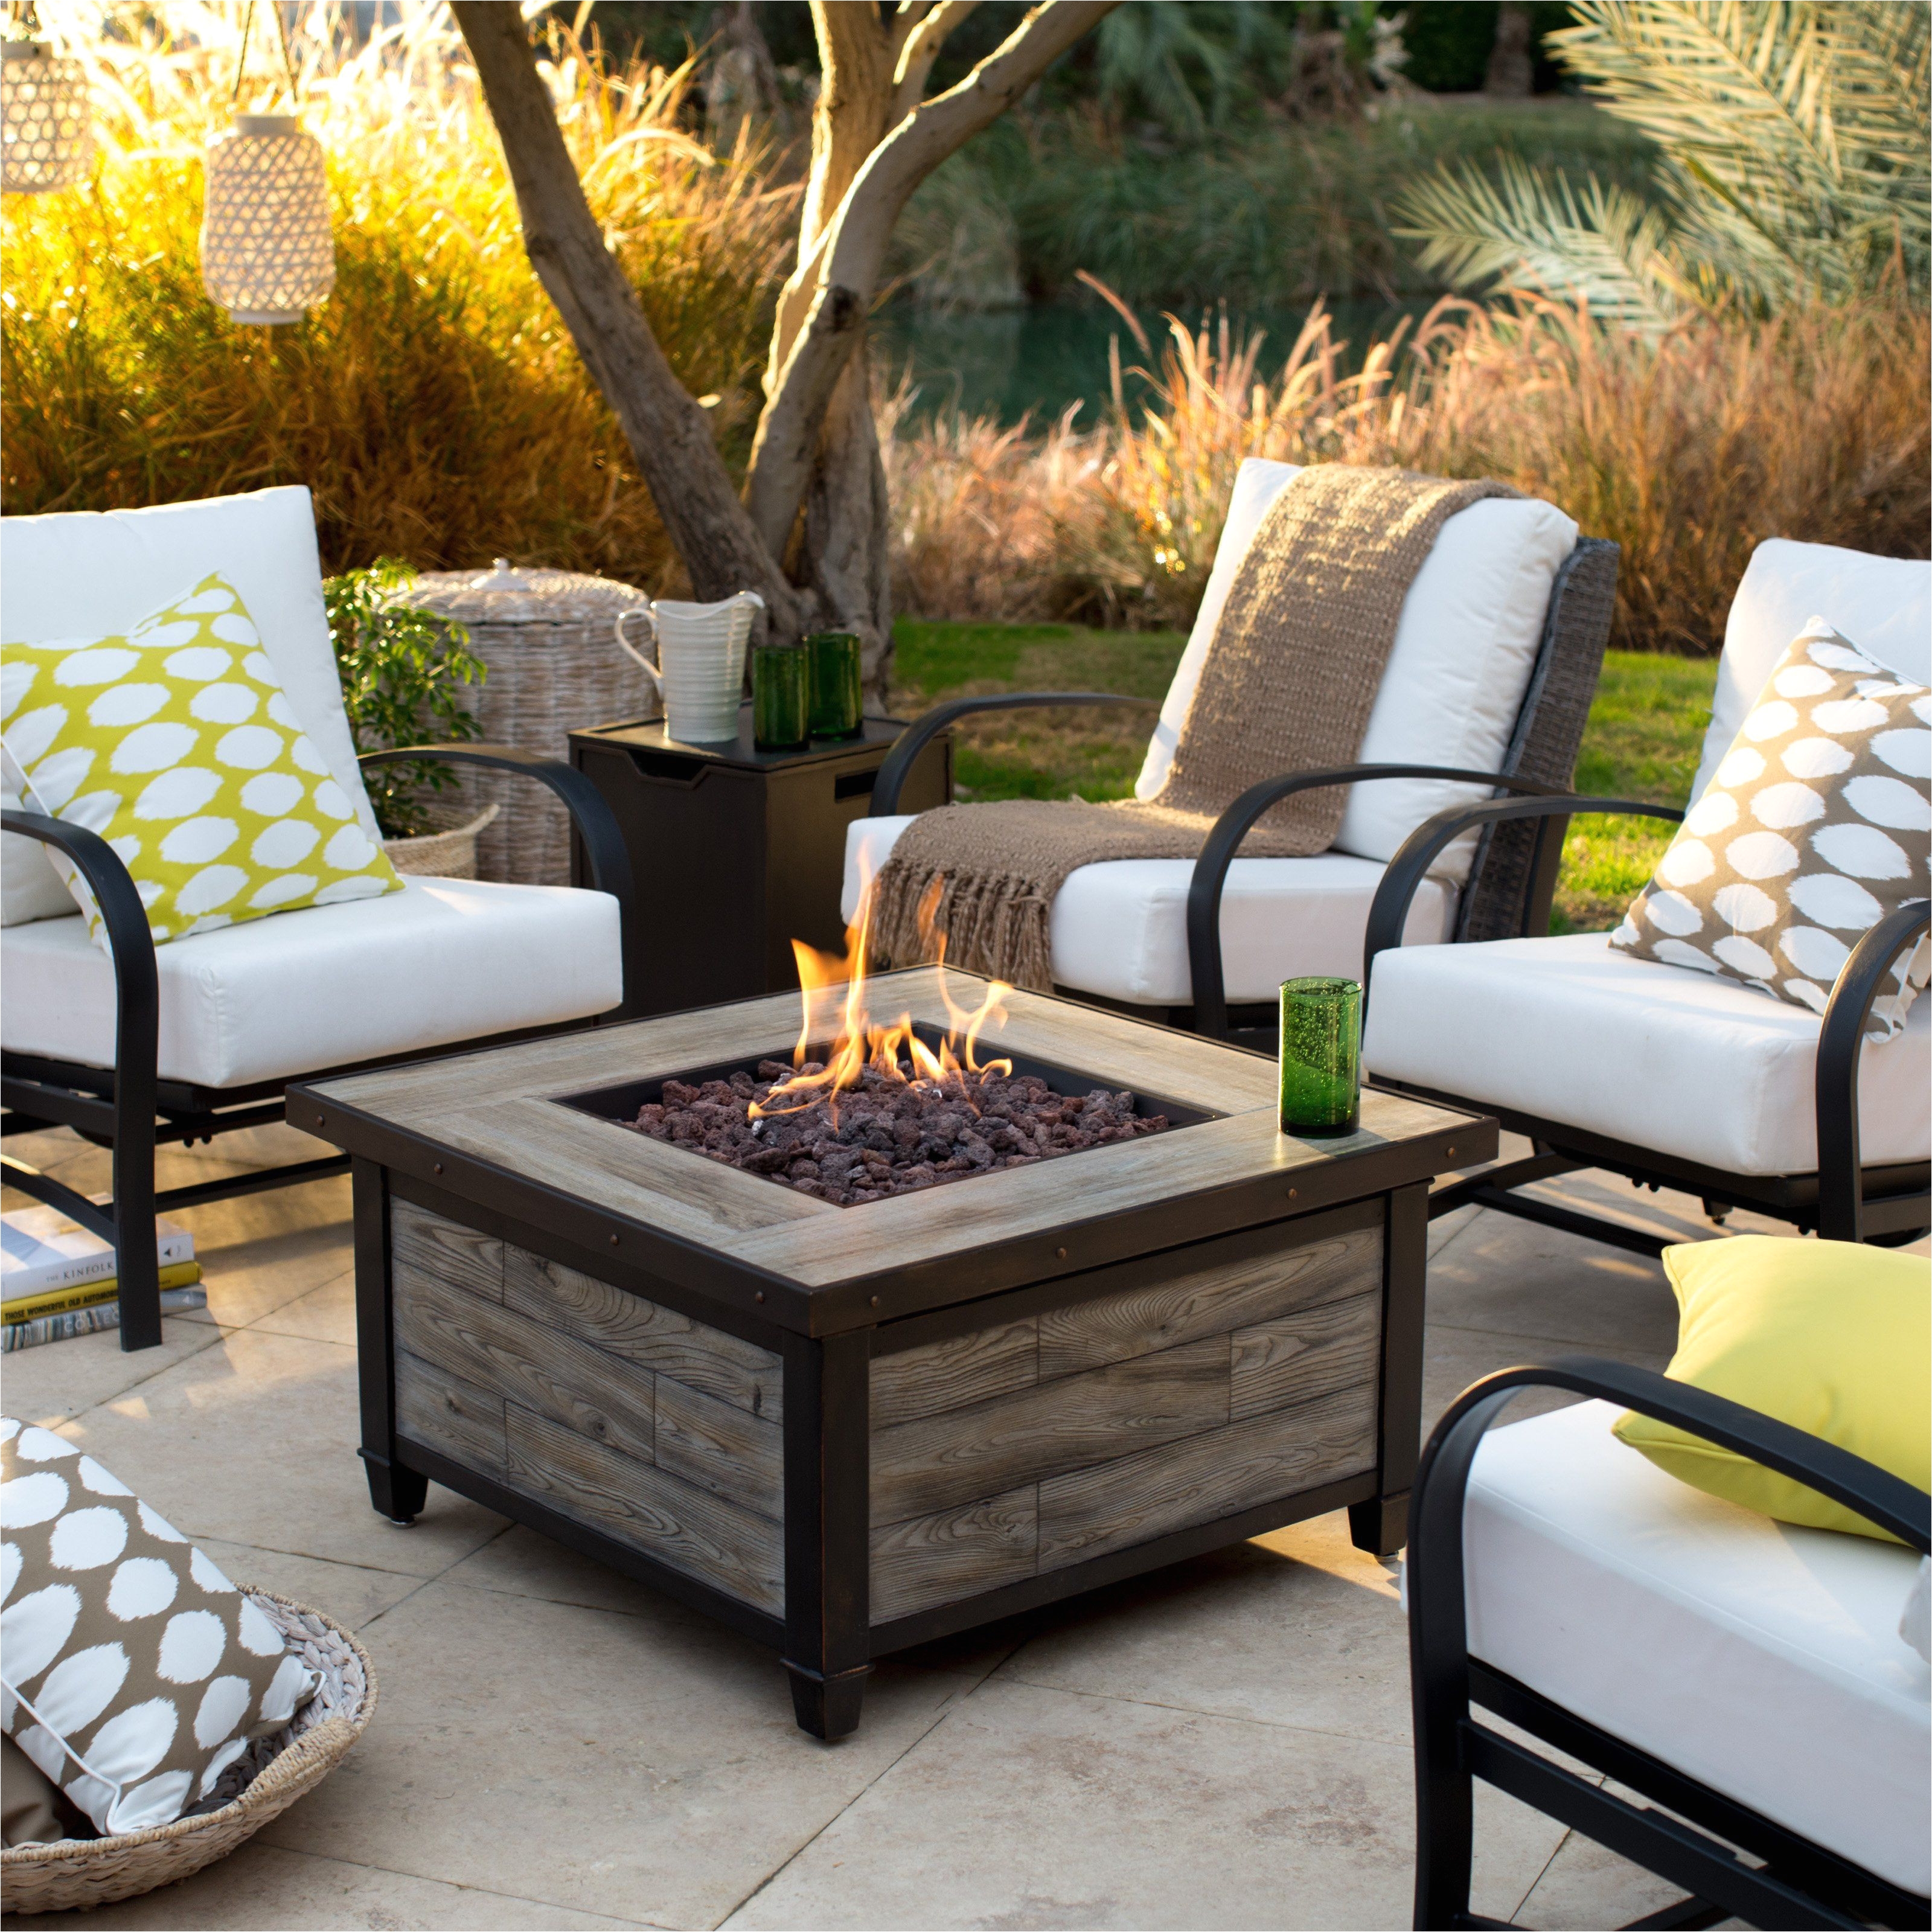 20 lovely fire pit coffee table design of fire pit stores near me